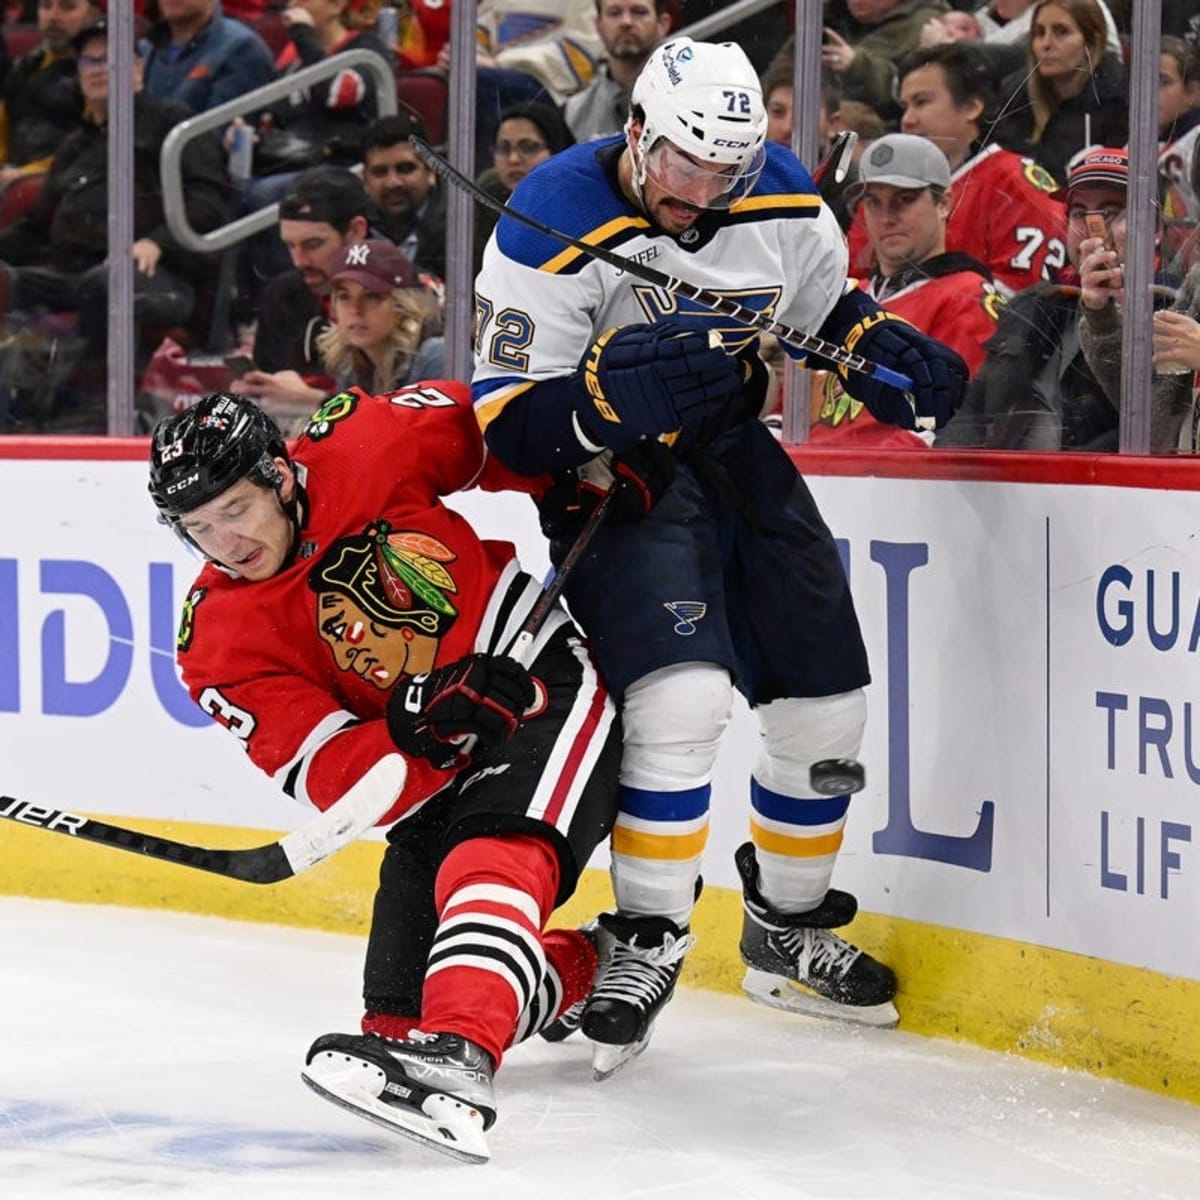 Blues at Blackhawks Free Live Stream NHL Online, Channel - How to Watch and Stream Major League and College Sports